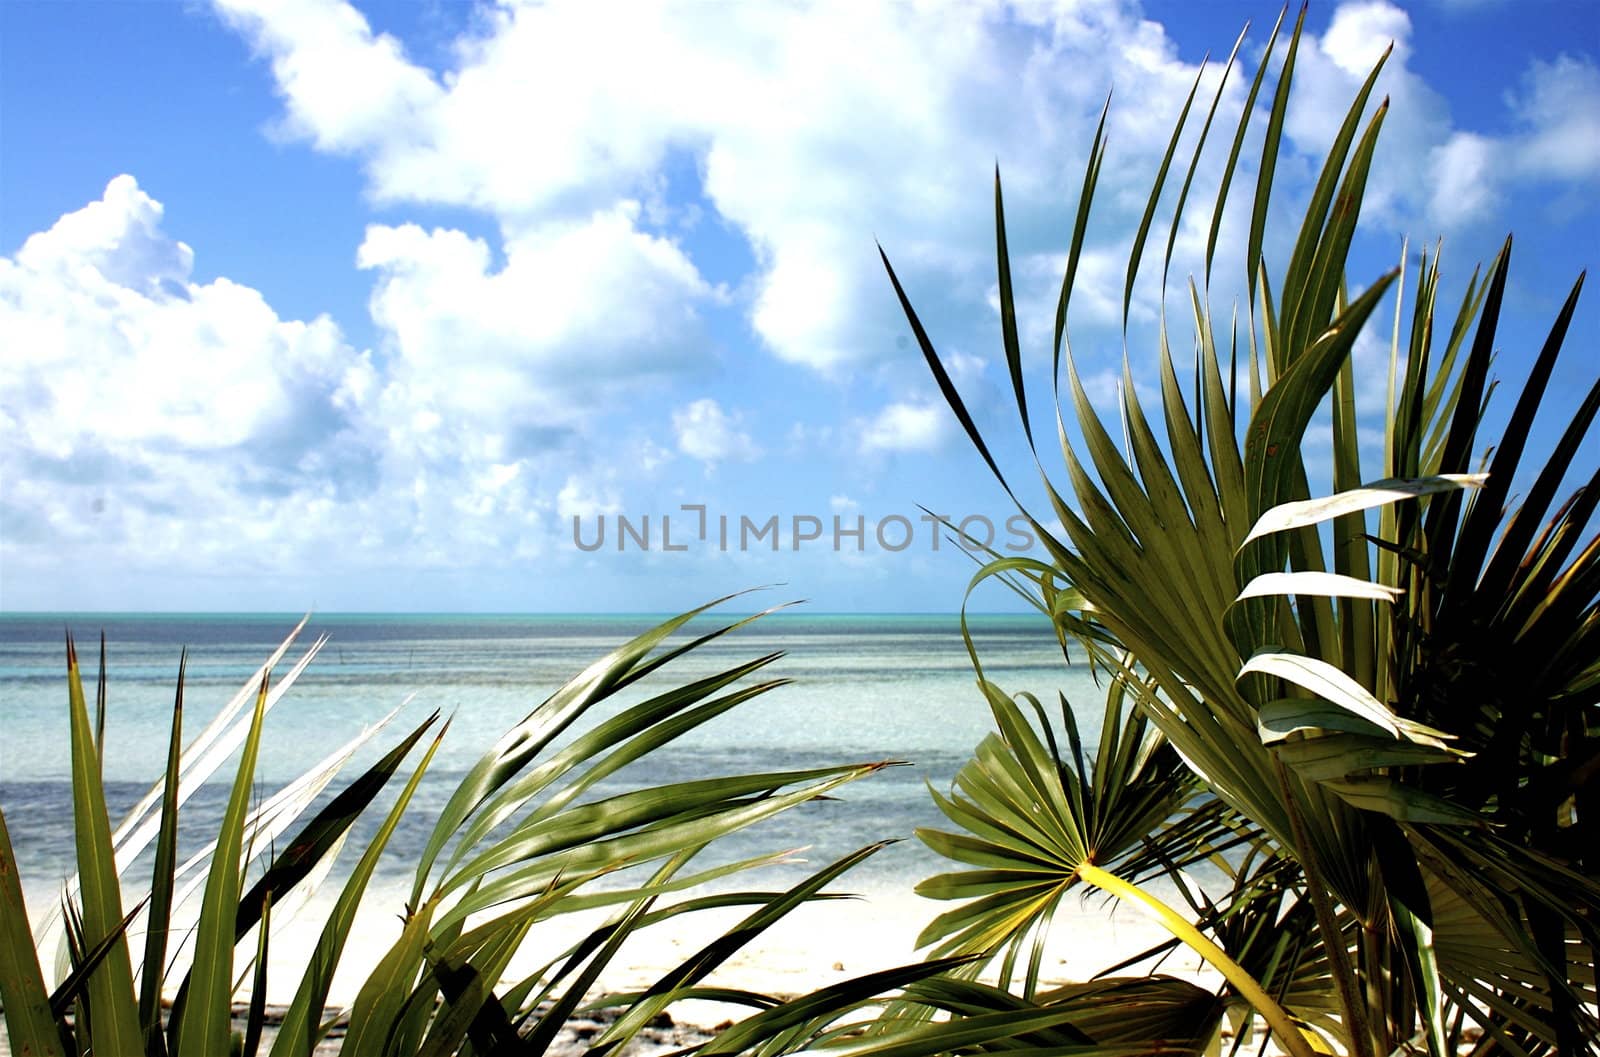 Landscape view of deserted Bahamian beach.  Looks like paradise with pure white sandy beach, turquoise ocean and palms.